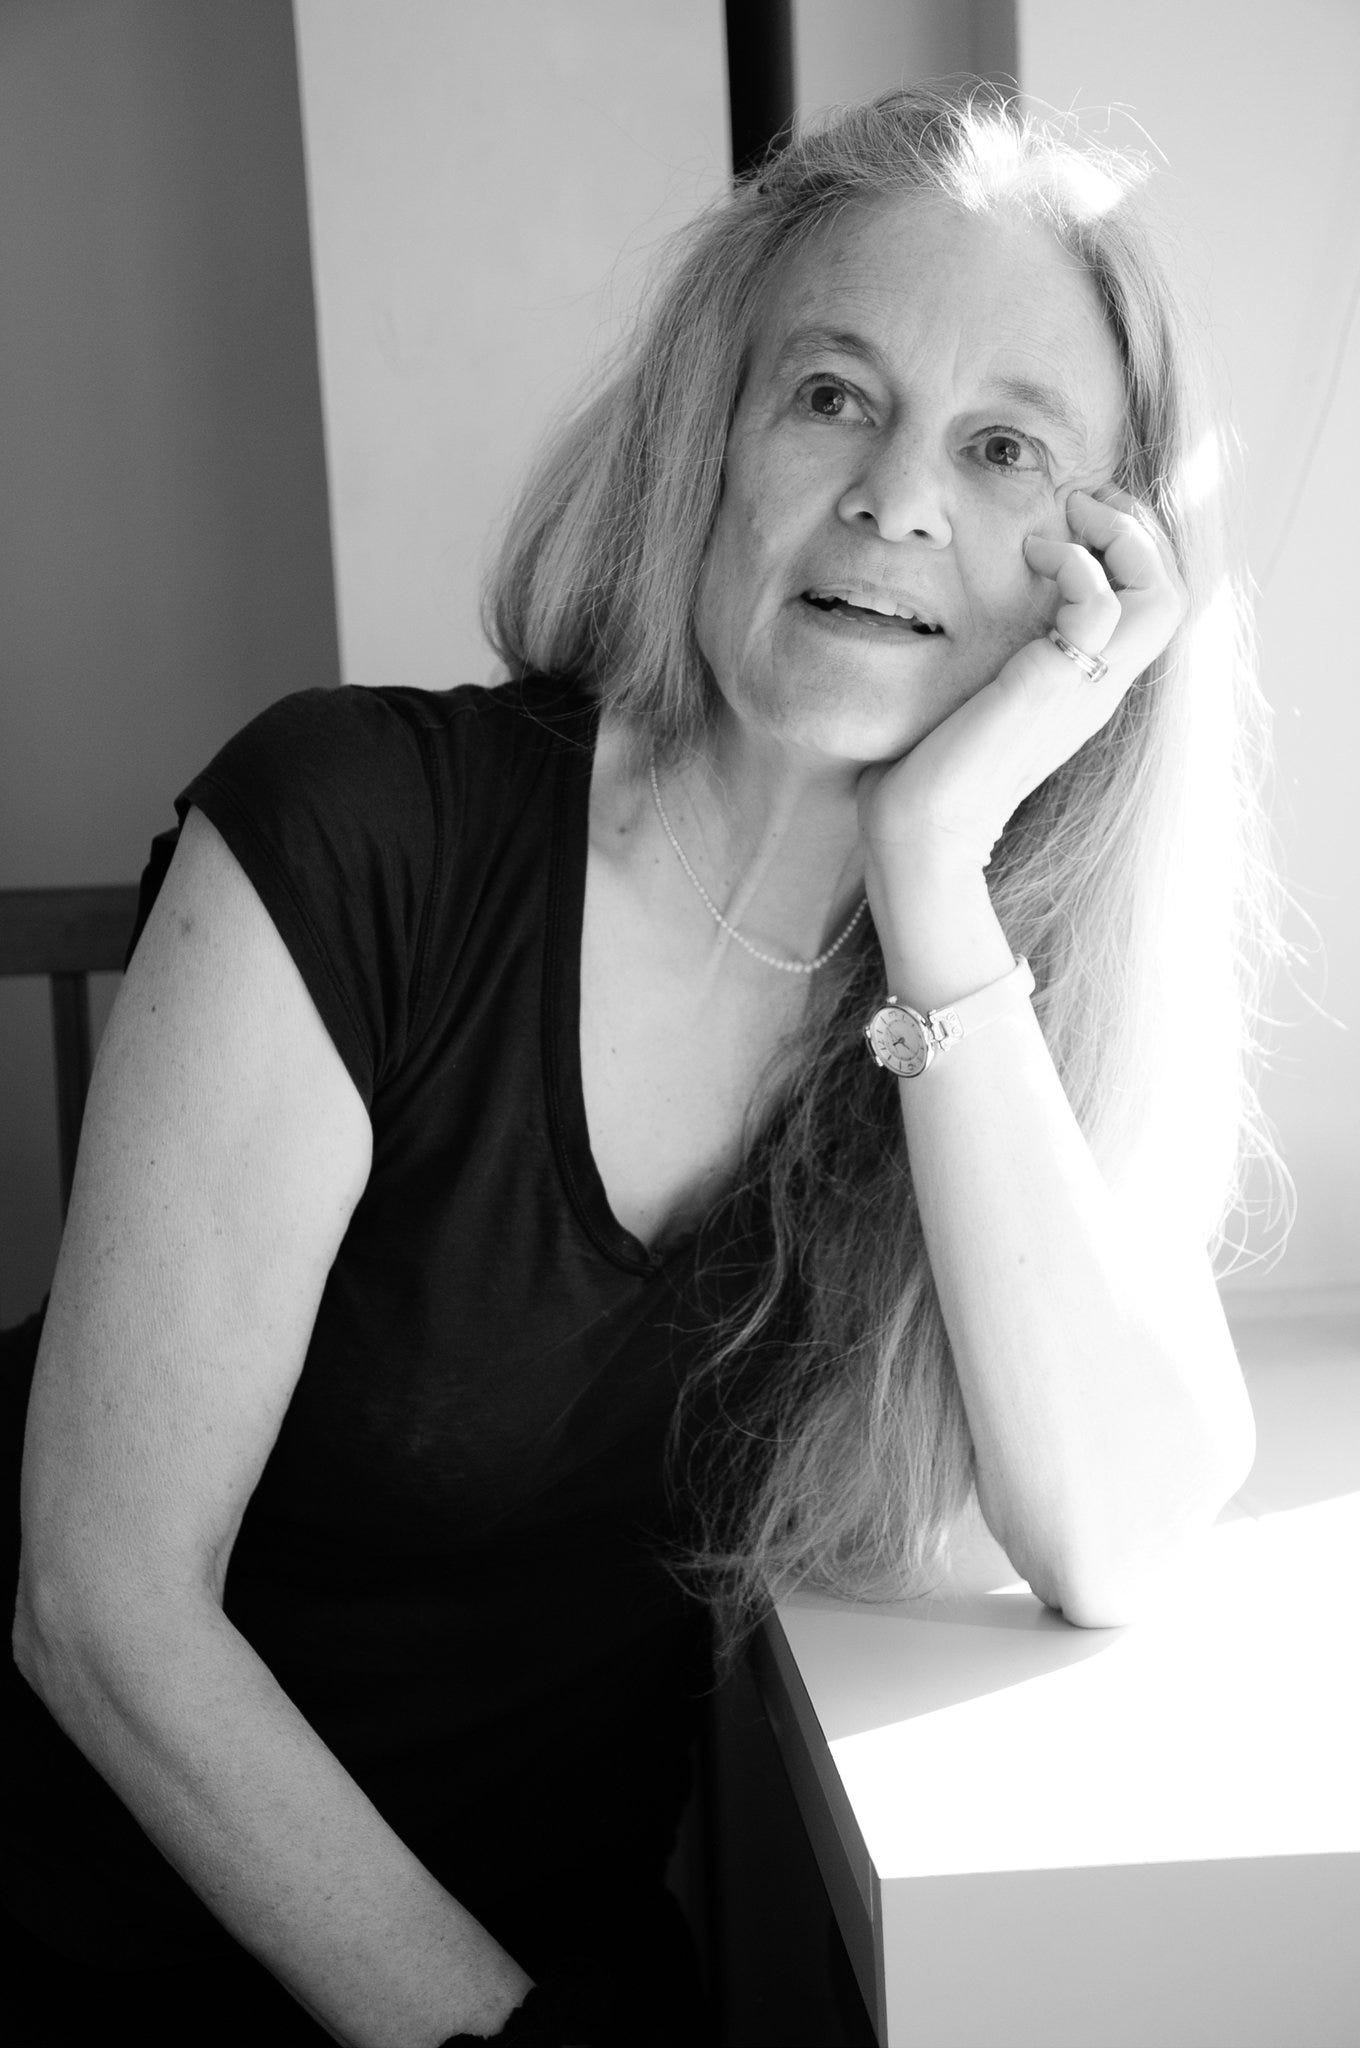 A recent black and white photo of Sharon Olds from the waist up. Her elbow is on the table and her hand props up her chin. She looks up and to her right. Her lips are parted as if she's speaking to someone.